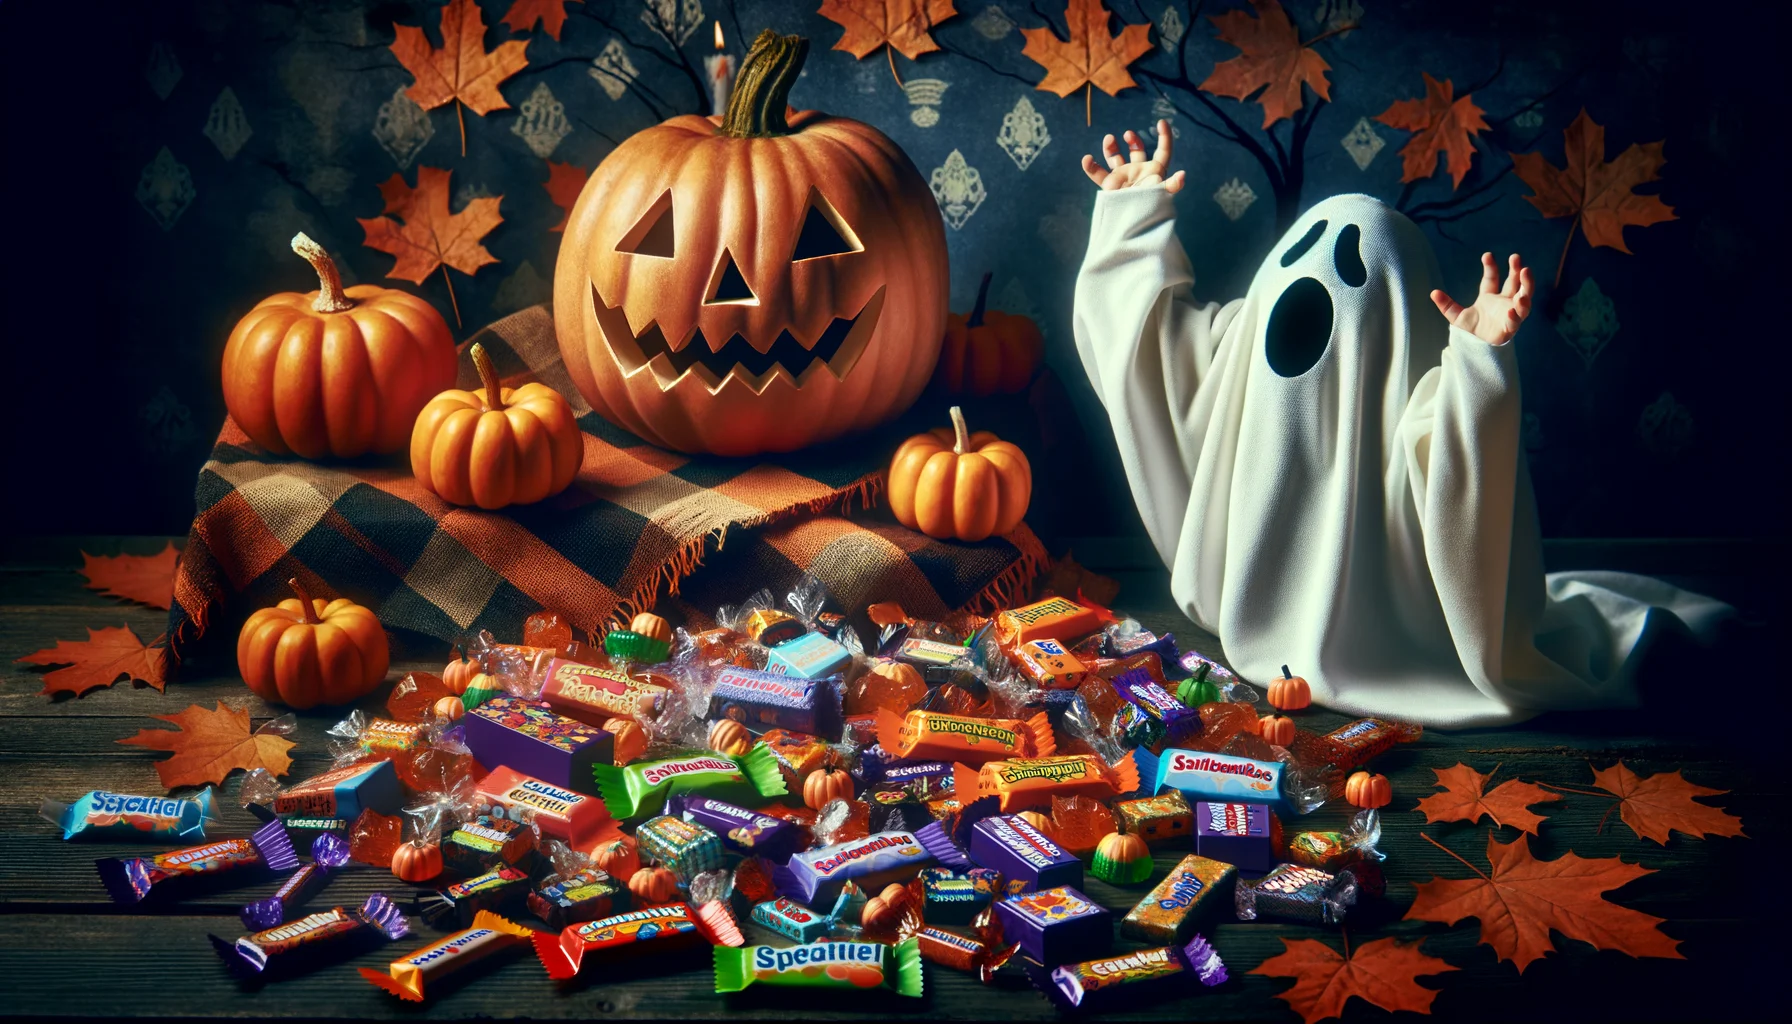 Create an image of a humorous realistic scenario suited for Halloween. Display an array of allergy-safe candies in vibrant wrappers, enticing kids of all age groups. The backdrop should be traditionally spooky with dusky hues and autumn leaves scattered around. A humorous twist could be a carved pumpkin struggling to decide among the myriad of safe candy options available. Maintaining the Halloween spirit, include a child dressed as a friendly ghost celebrating the expansive selection of candies.